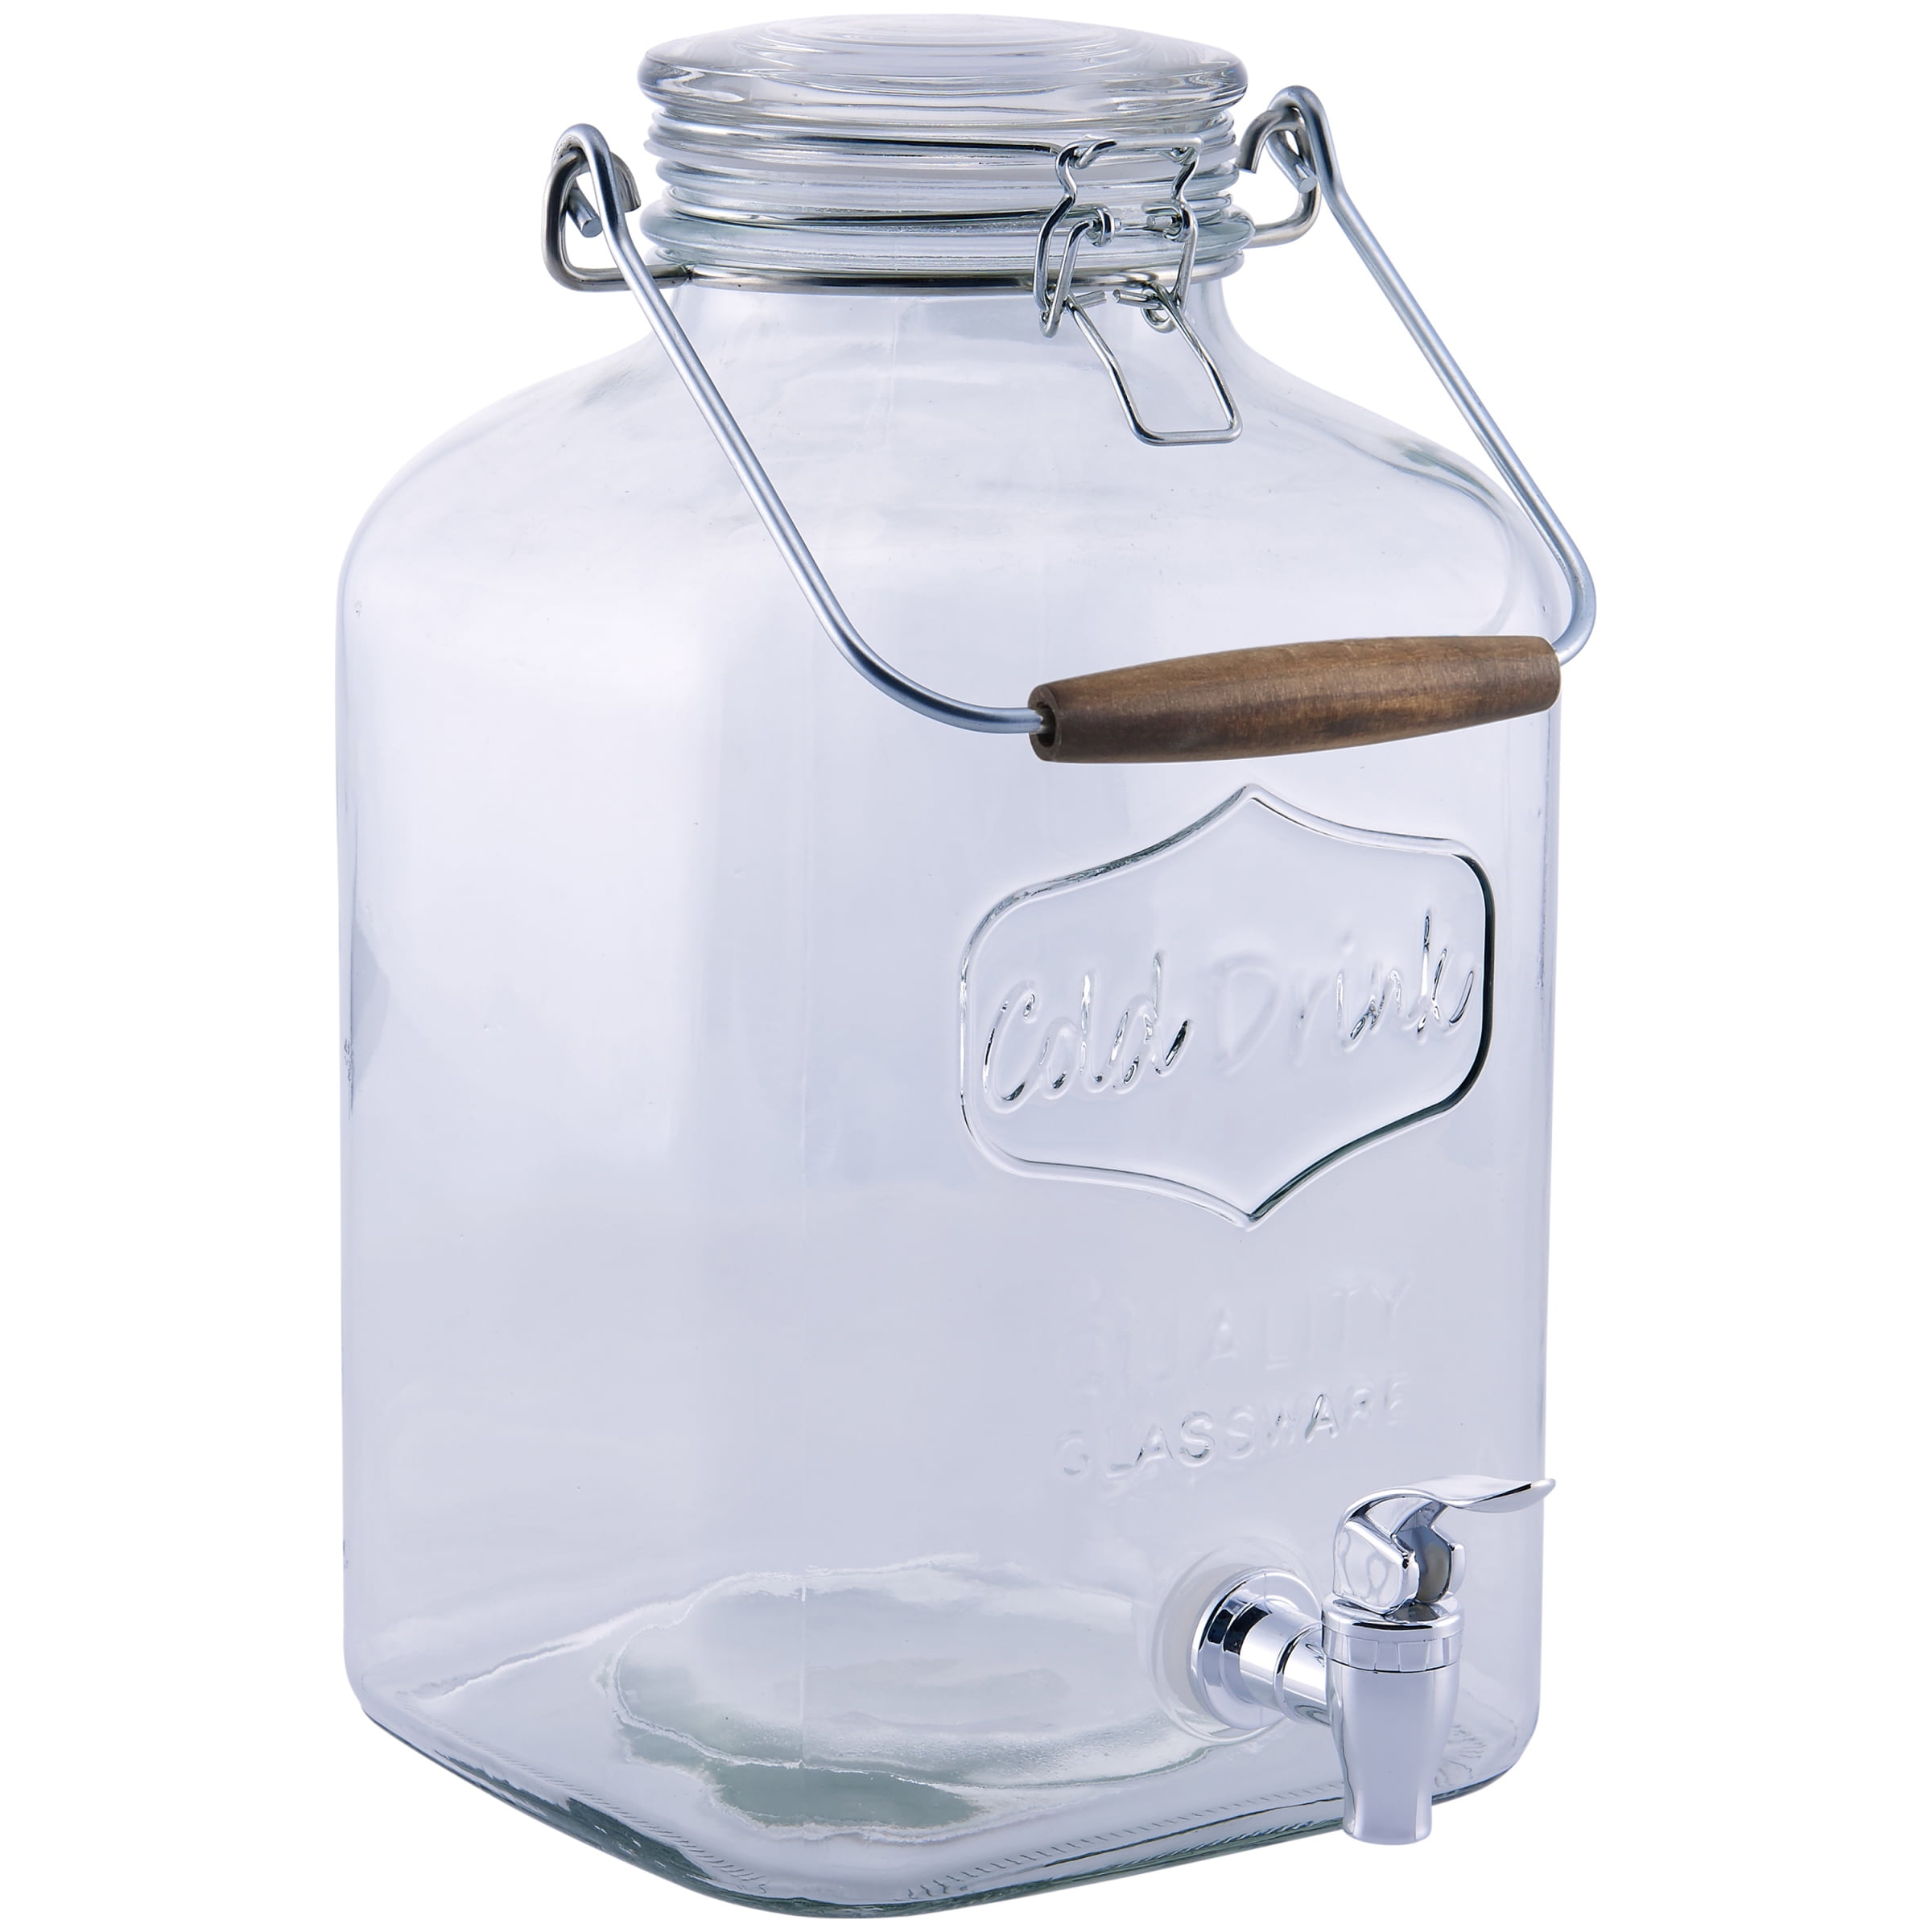 The BEST 2 Gallon (Large) Glass Beverage Dispenser w Stainless